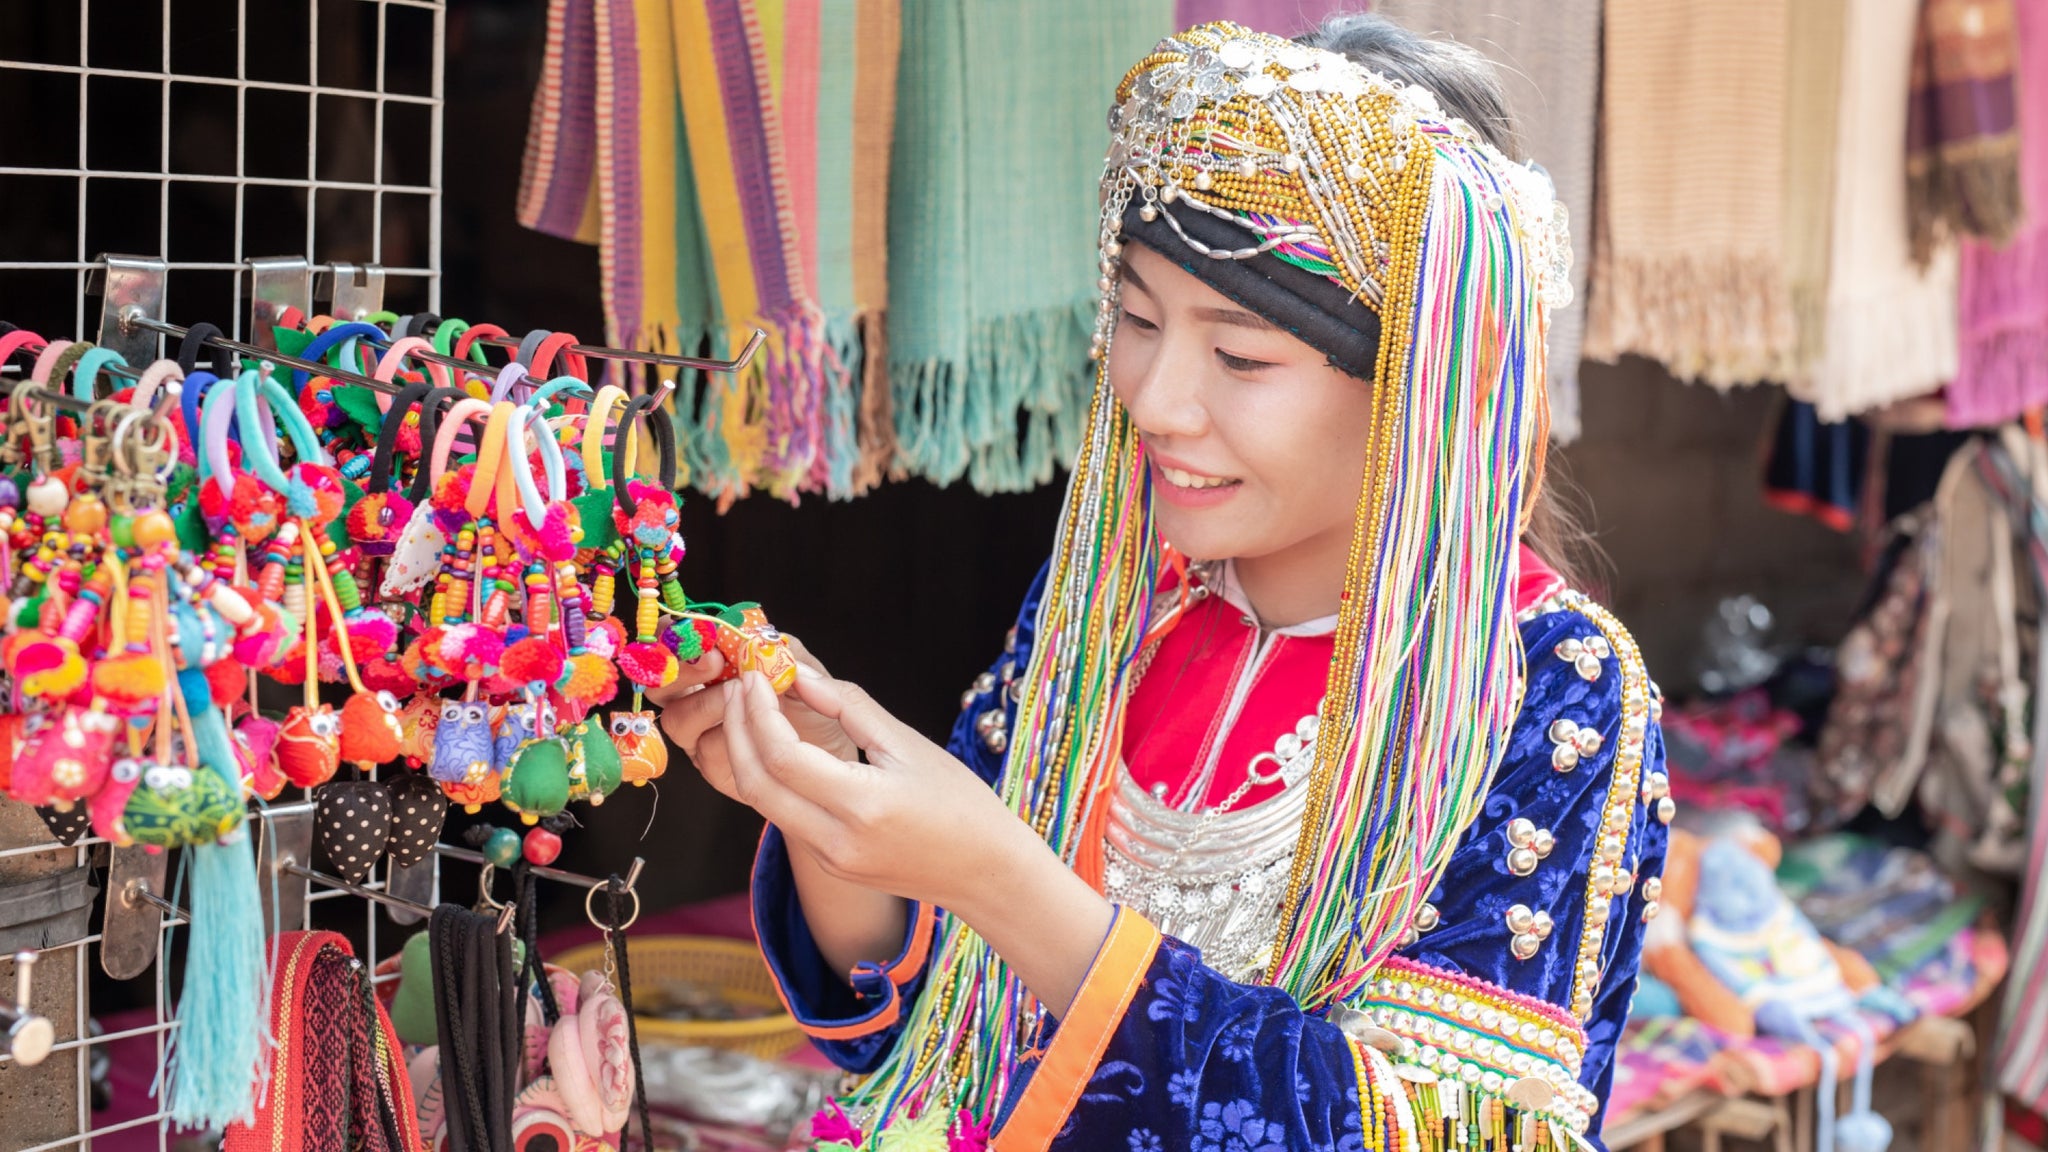 The Preservation of Traditional Clothing and Fashion